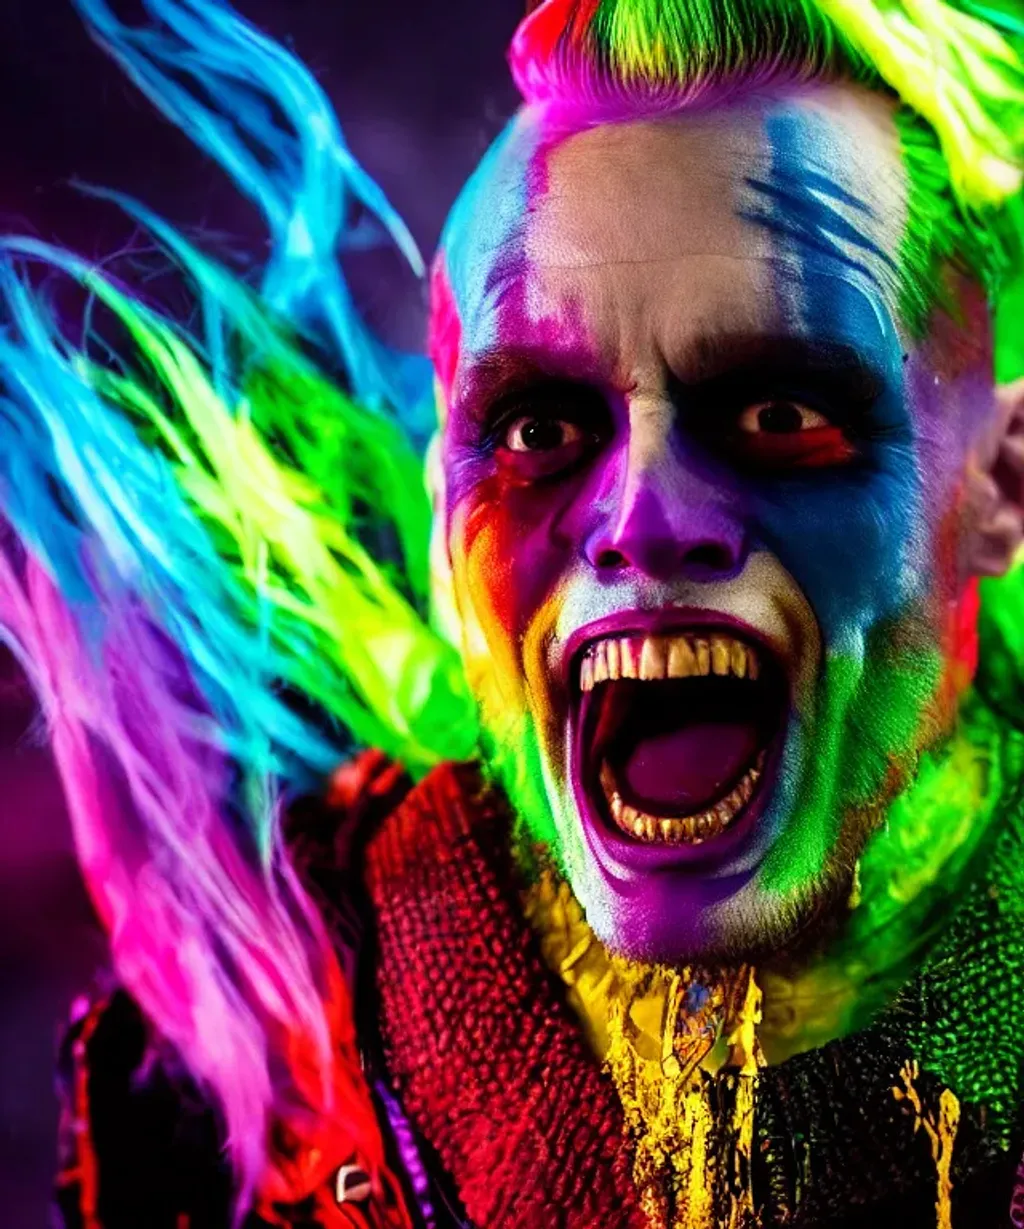 Prompt: vivid dripping colors Jered Leto as Joker Crome Teeth Suicide Squad vivid color street level action scene low angle masterpiece, cinematic, dramatic, Artstation, by Frank Frazetta, by H.R. Giger, by Mark Brooks, Octane render, Unreal Engine, by Wētā FX, by WLOP, Filmic, Photography, Photoshoot, Ultra-Wide Angle, Depth of Field, DOF, F/2.8, 5-Dimensional, Everdimensional, Alldimensional, 8K, 32k, Megapixel, CMYK, Adobe RGB, HSV, ProPhoto RGB, Rim Lights, Marquee, Stroboscope, OLED, AMOLED, Quantum Dot Display, Global Illumination, Ray Tracing Global Illumination, Ambient Occlusion, Translucidluminescence, Shadows, Chromatic, Prismatic, Lumen Reflections, Parallax, Quantization, Edge Detection, Textured, Convolution Matrix, Harris Shutter, FXAA, Post Processing, SFX, insanely detailed and intricate, hypermaximalist, elegant, ornate, hyper realistic, super detailed, poster, sharp focus, hyperrealism, insanely detailed, lush detail, filigree, intricate, crystalline, perfectionism, max detail, 4k uhd, spirals, tendrils, ornate, HQ, hard edge, breathtaking, mdjrny-v4 style, highly detailed, tarot card, symmetry, character design, professional